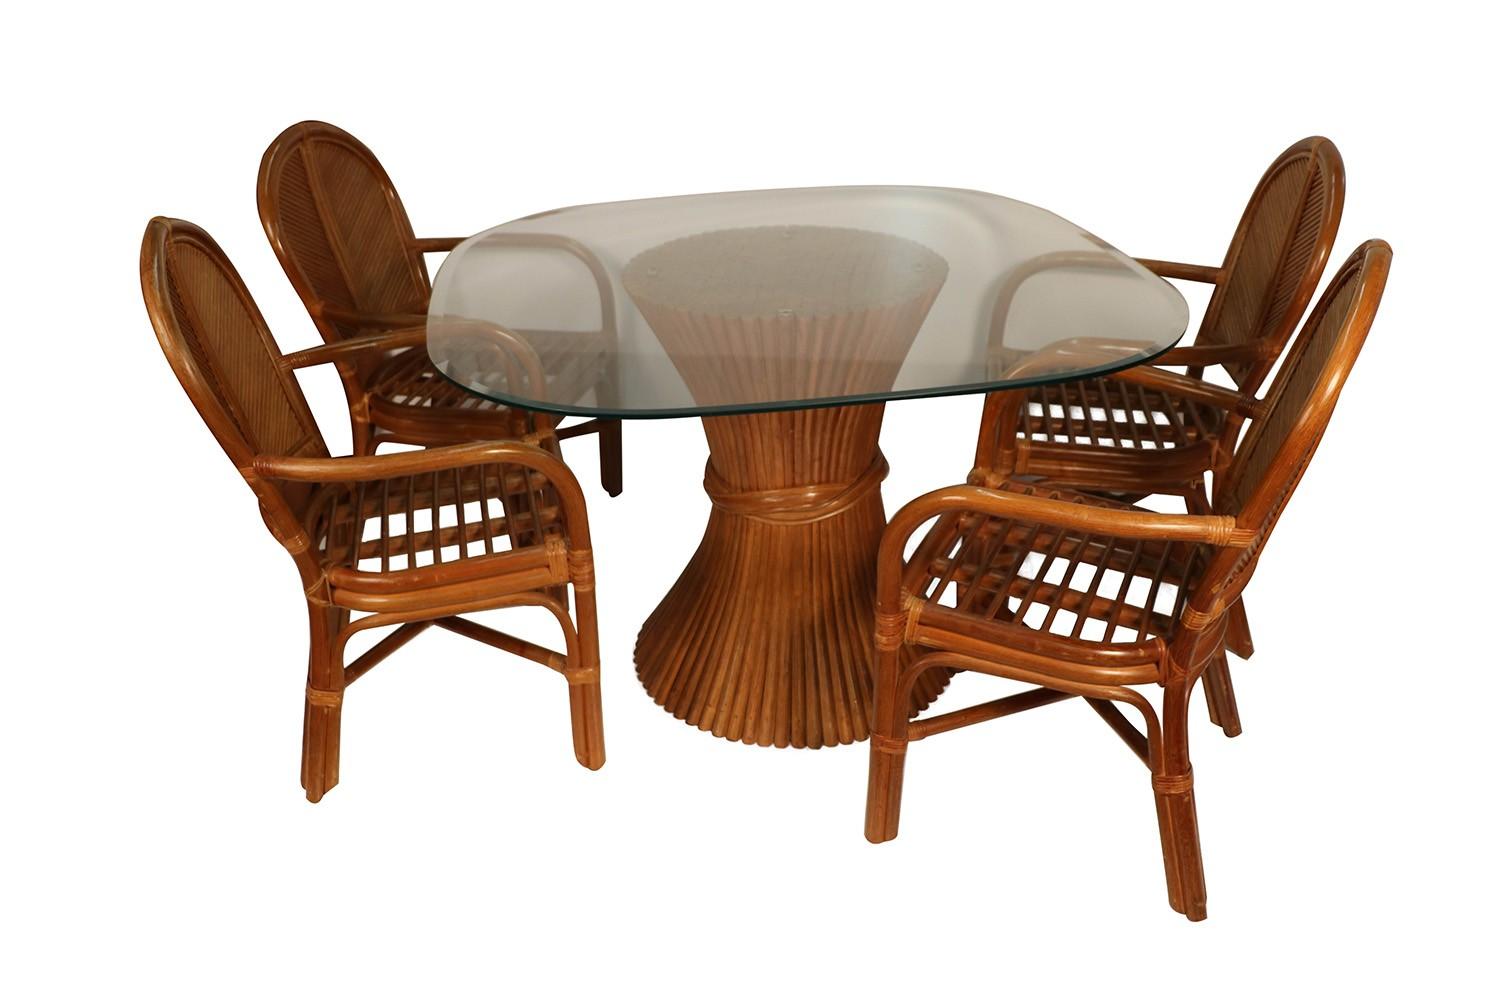 A stunning Rattan dining set in the style of McGuire Furniture. Features beveled edge square glass tabletop with rounded corners resting on round sheaf of wheat style rattan base, beautifully paired with four matching chairs, each with off white